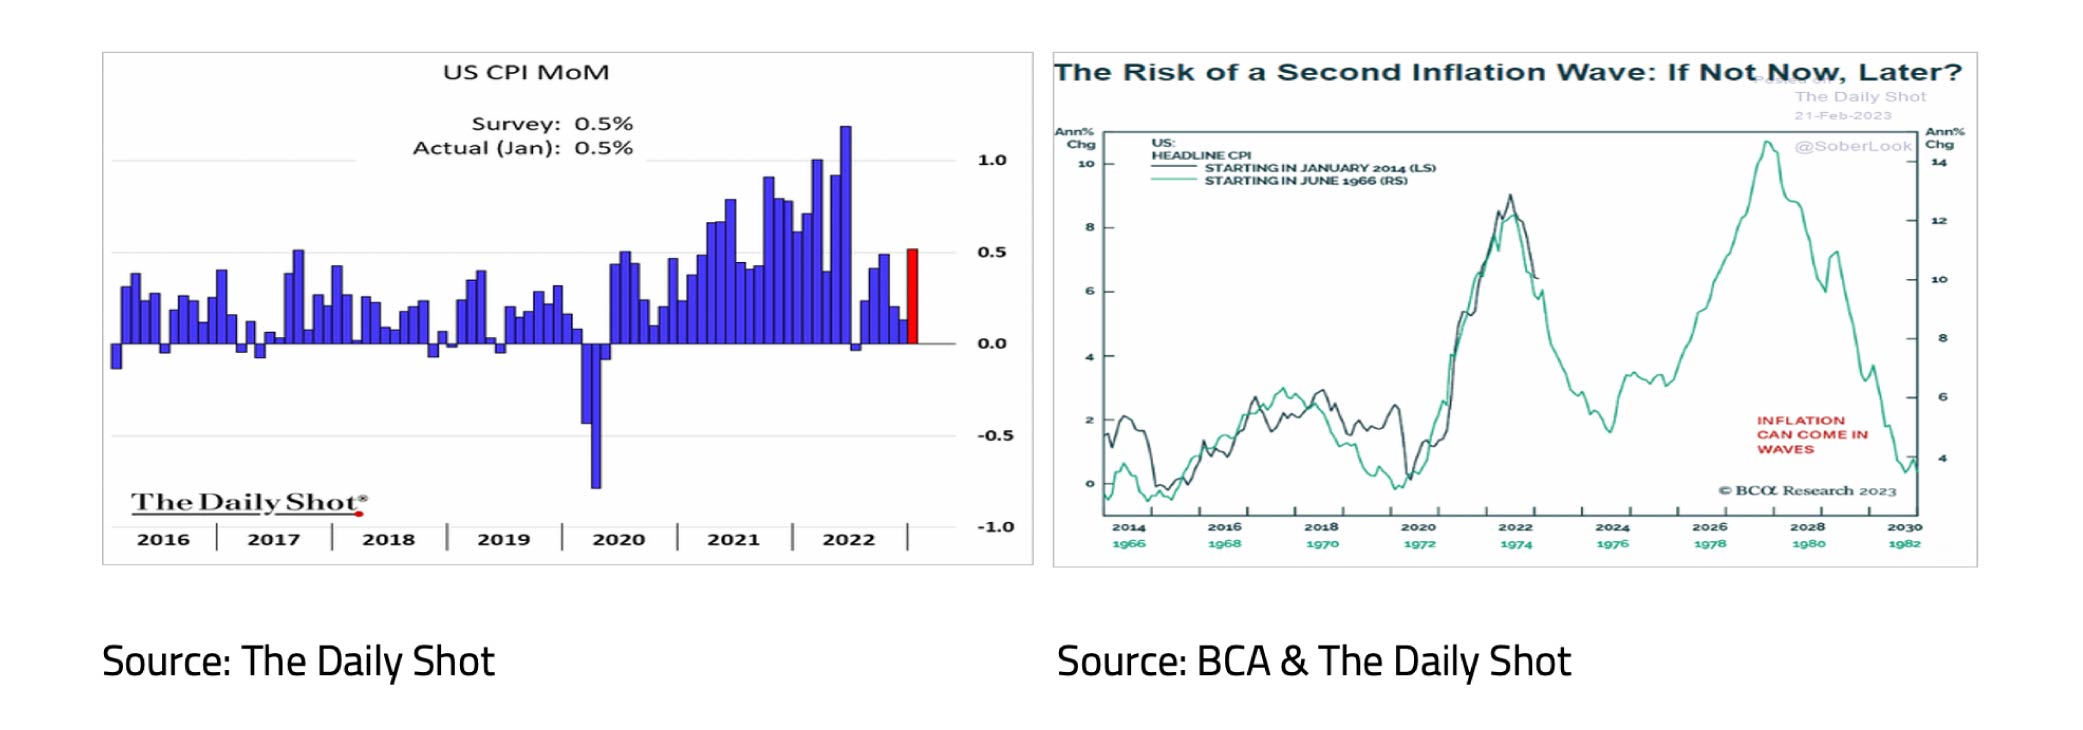 The risk of a second inflation wave - March 23